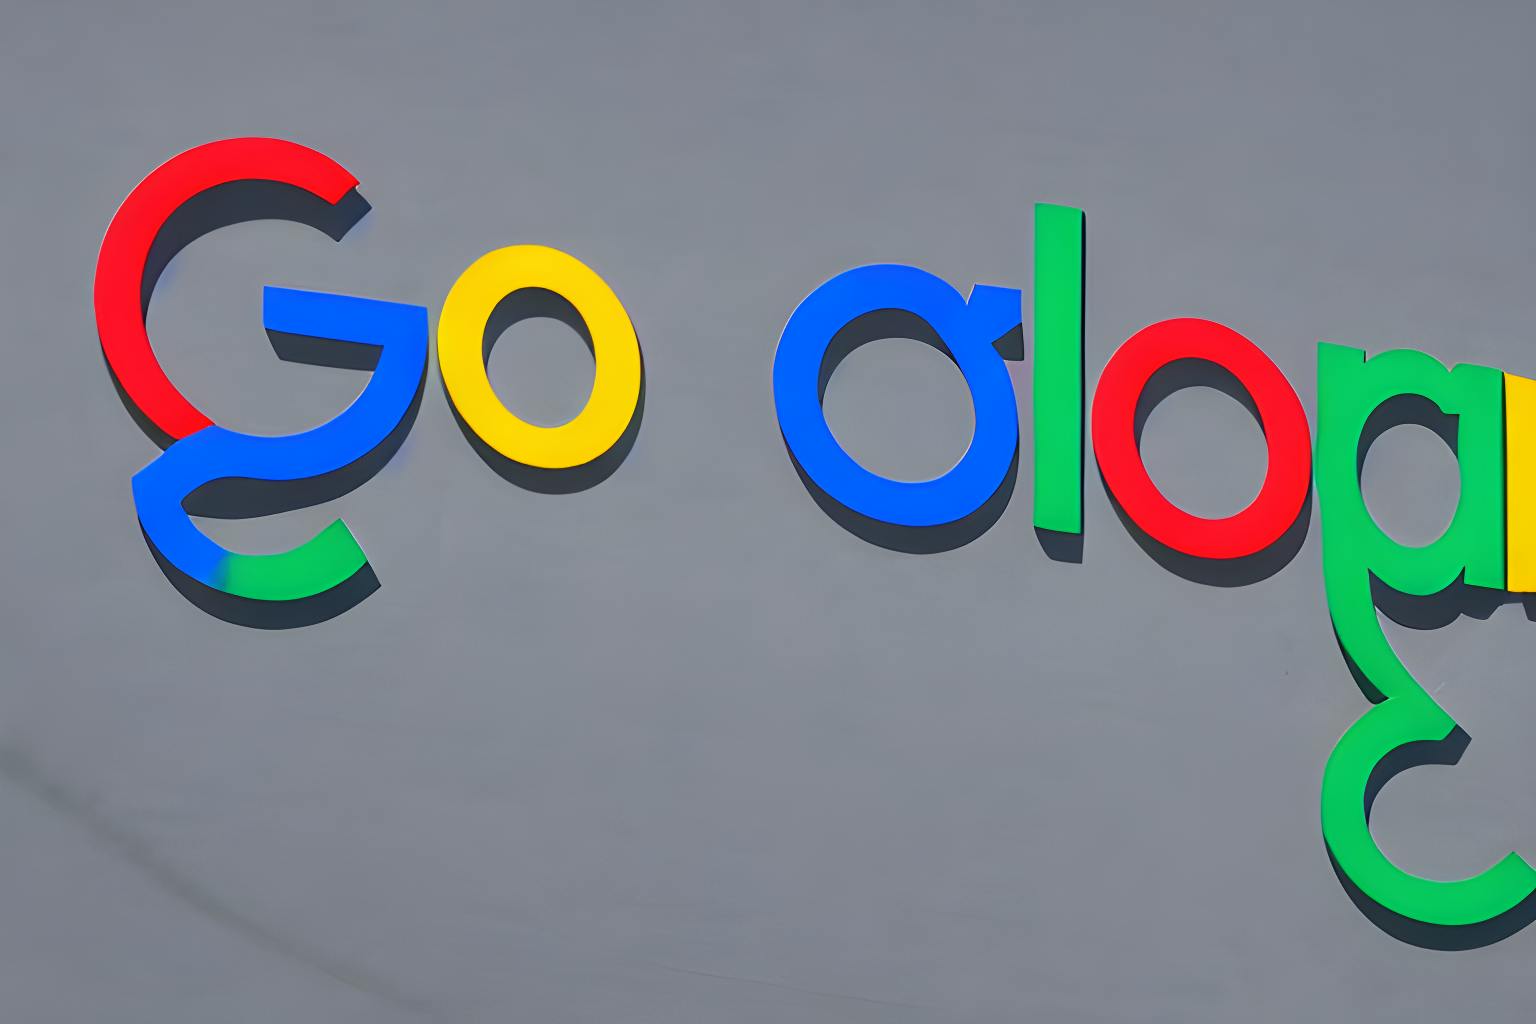 featured image - Does Google’s Ad Business Fund Disinformation? The Truth